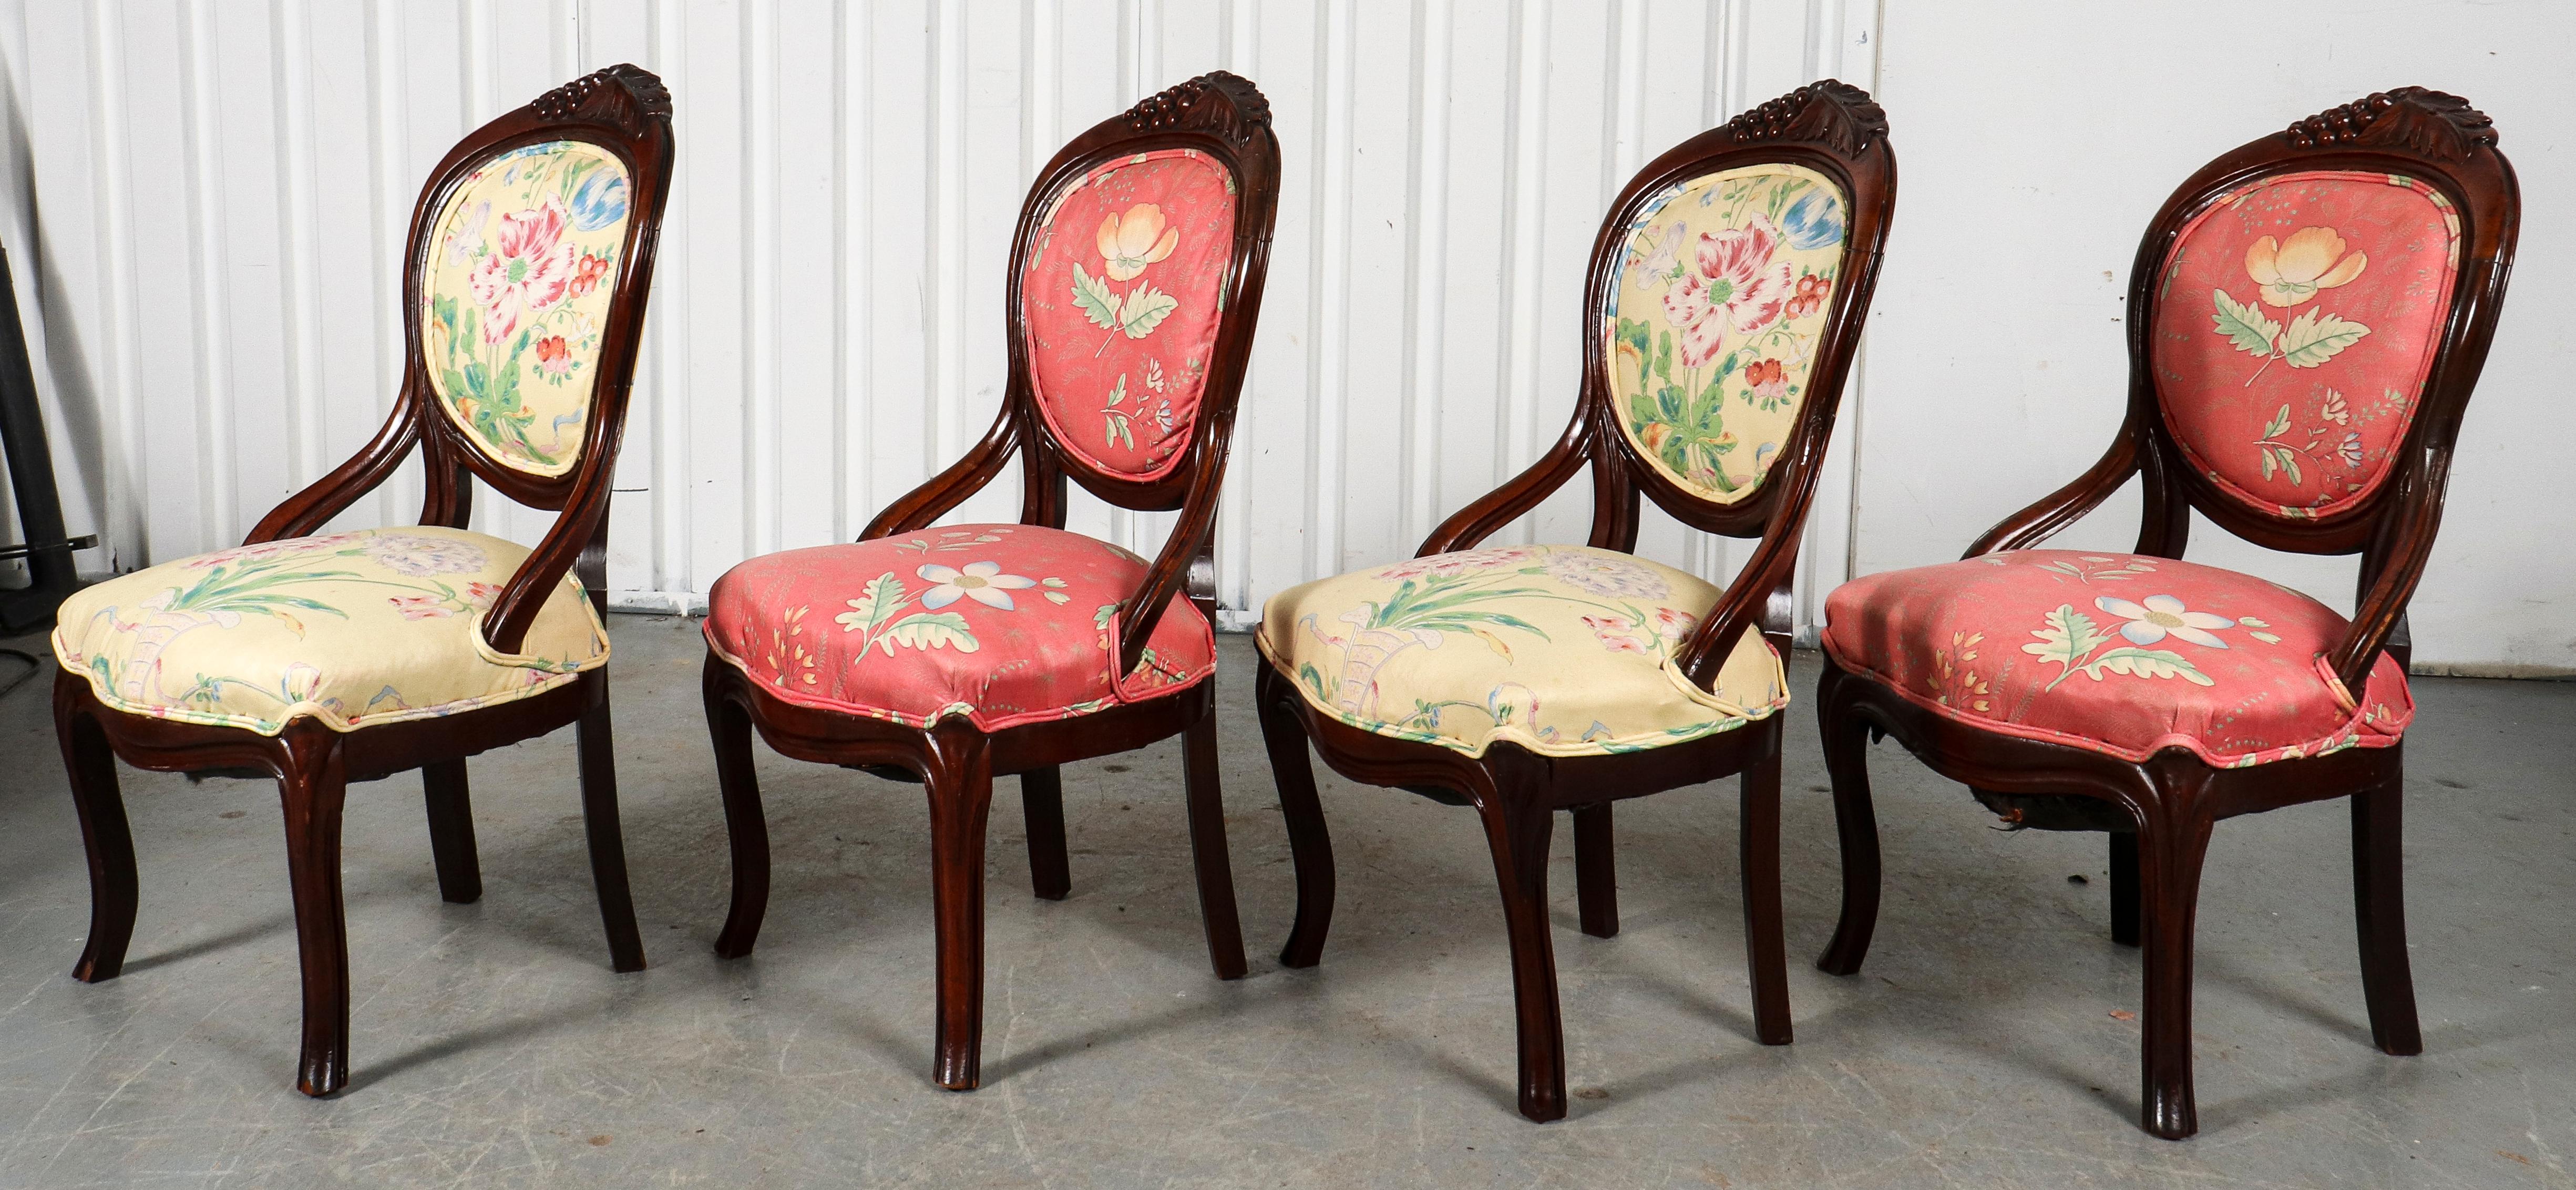 American Rococo Revival Style Wooden Chairs In Good Condition For Sale In New York, NY